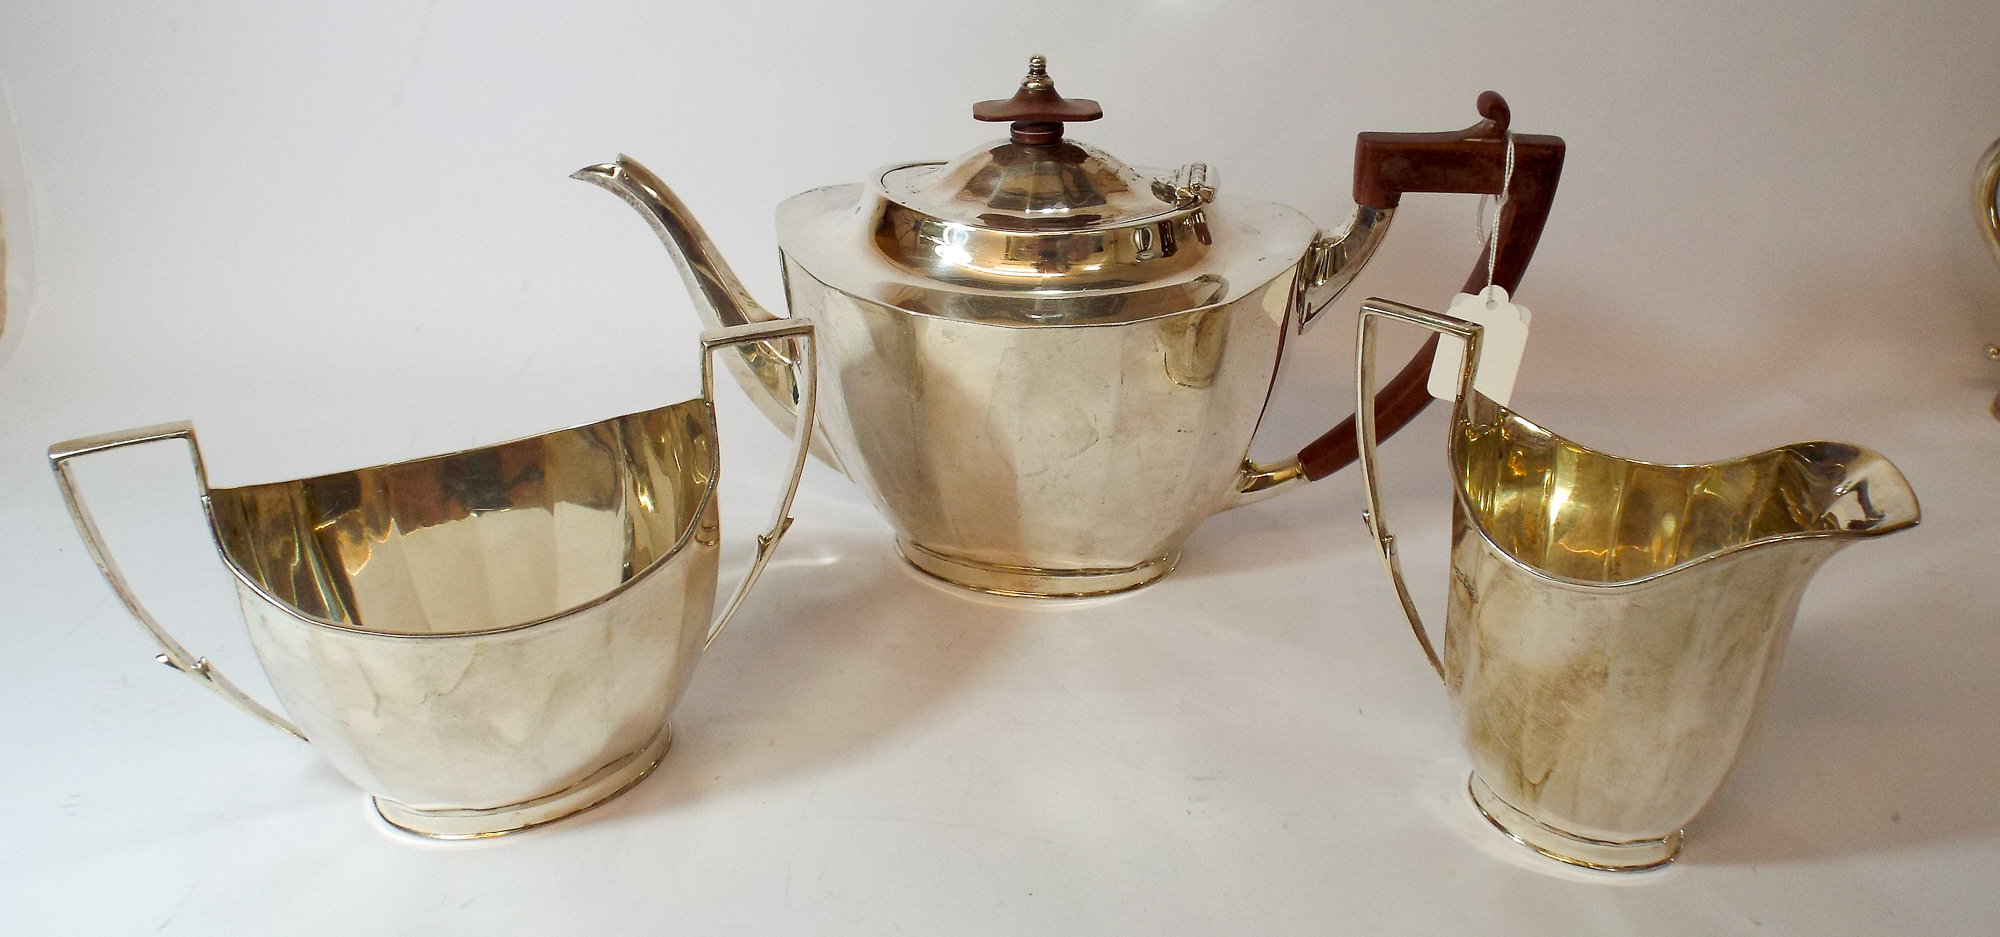 A three piece silver tea service, of panelled classical design, retailed by Mappin & Webb, - Image 2 of 3